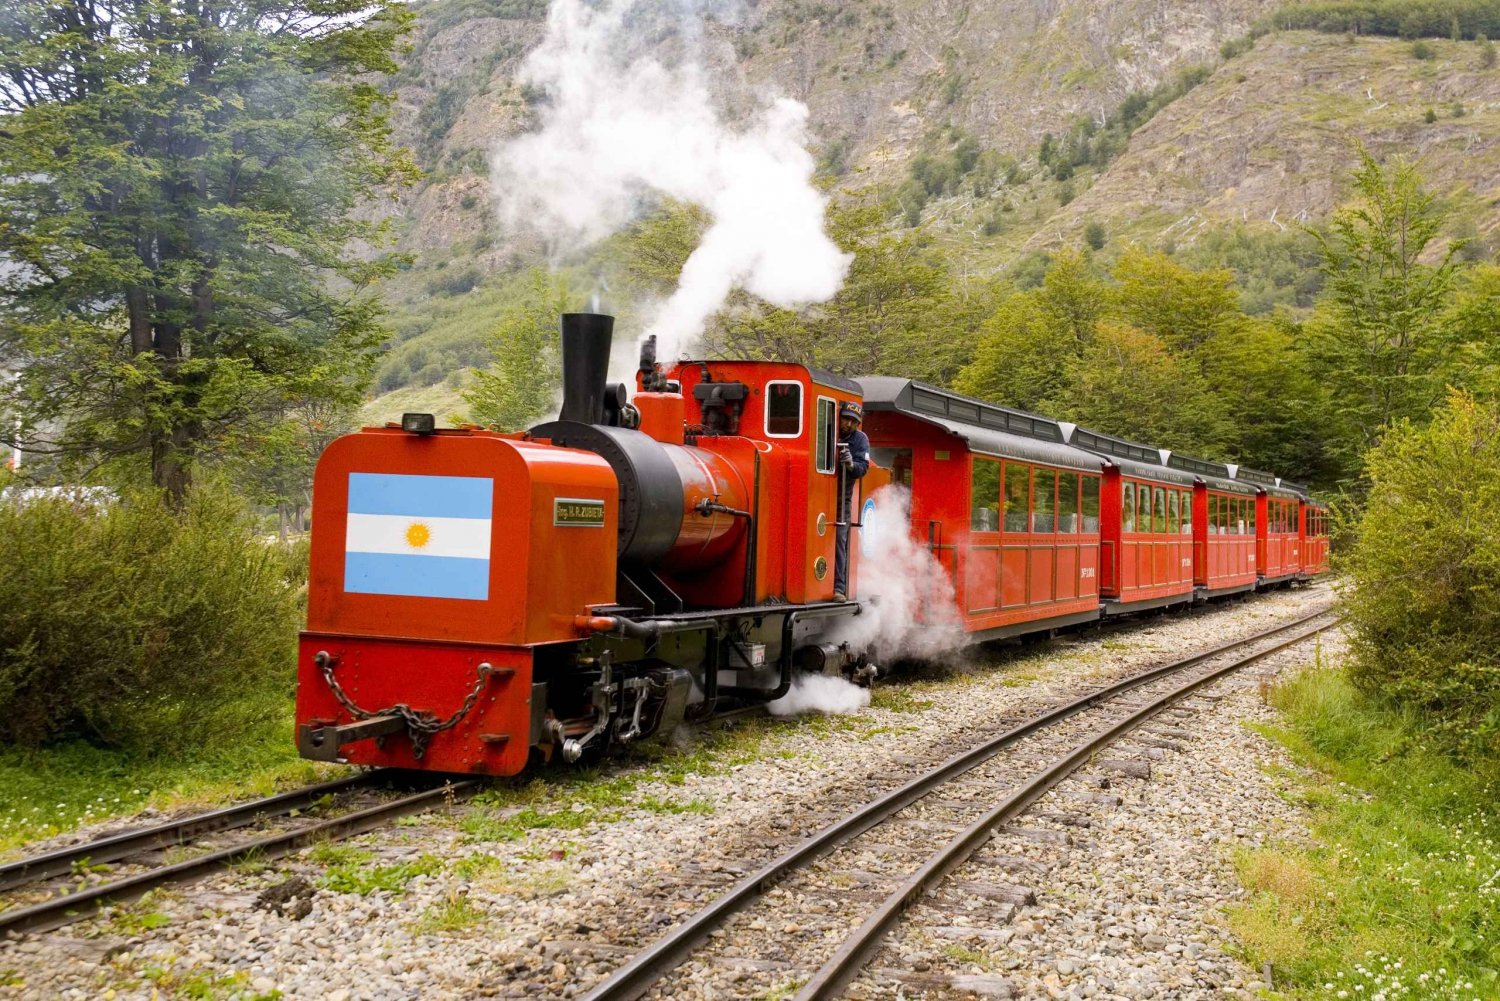 End of the World Train & Tierra del Fuego National Park